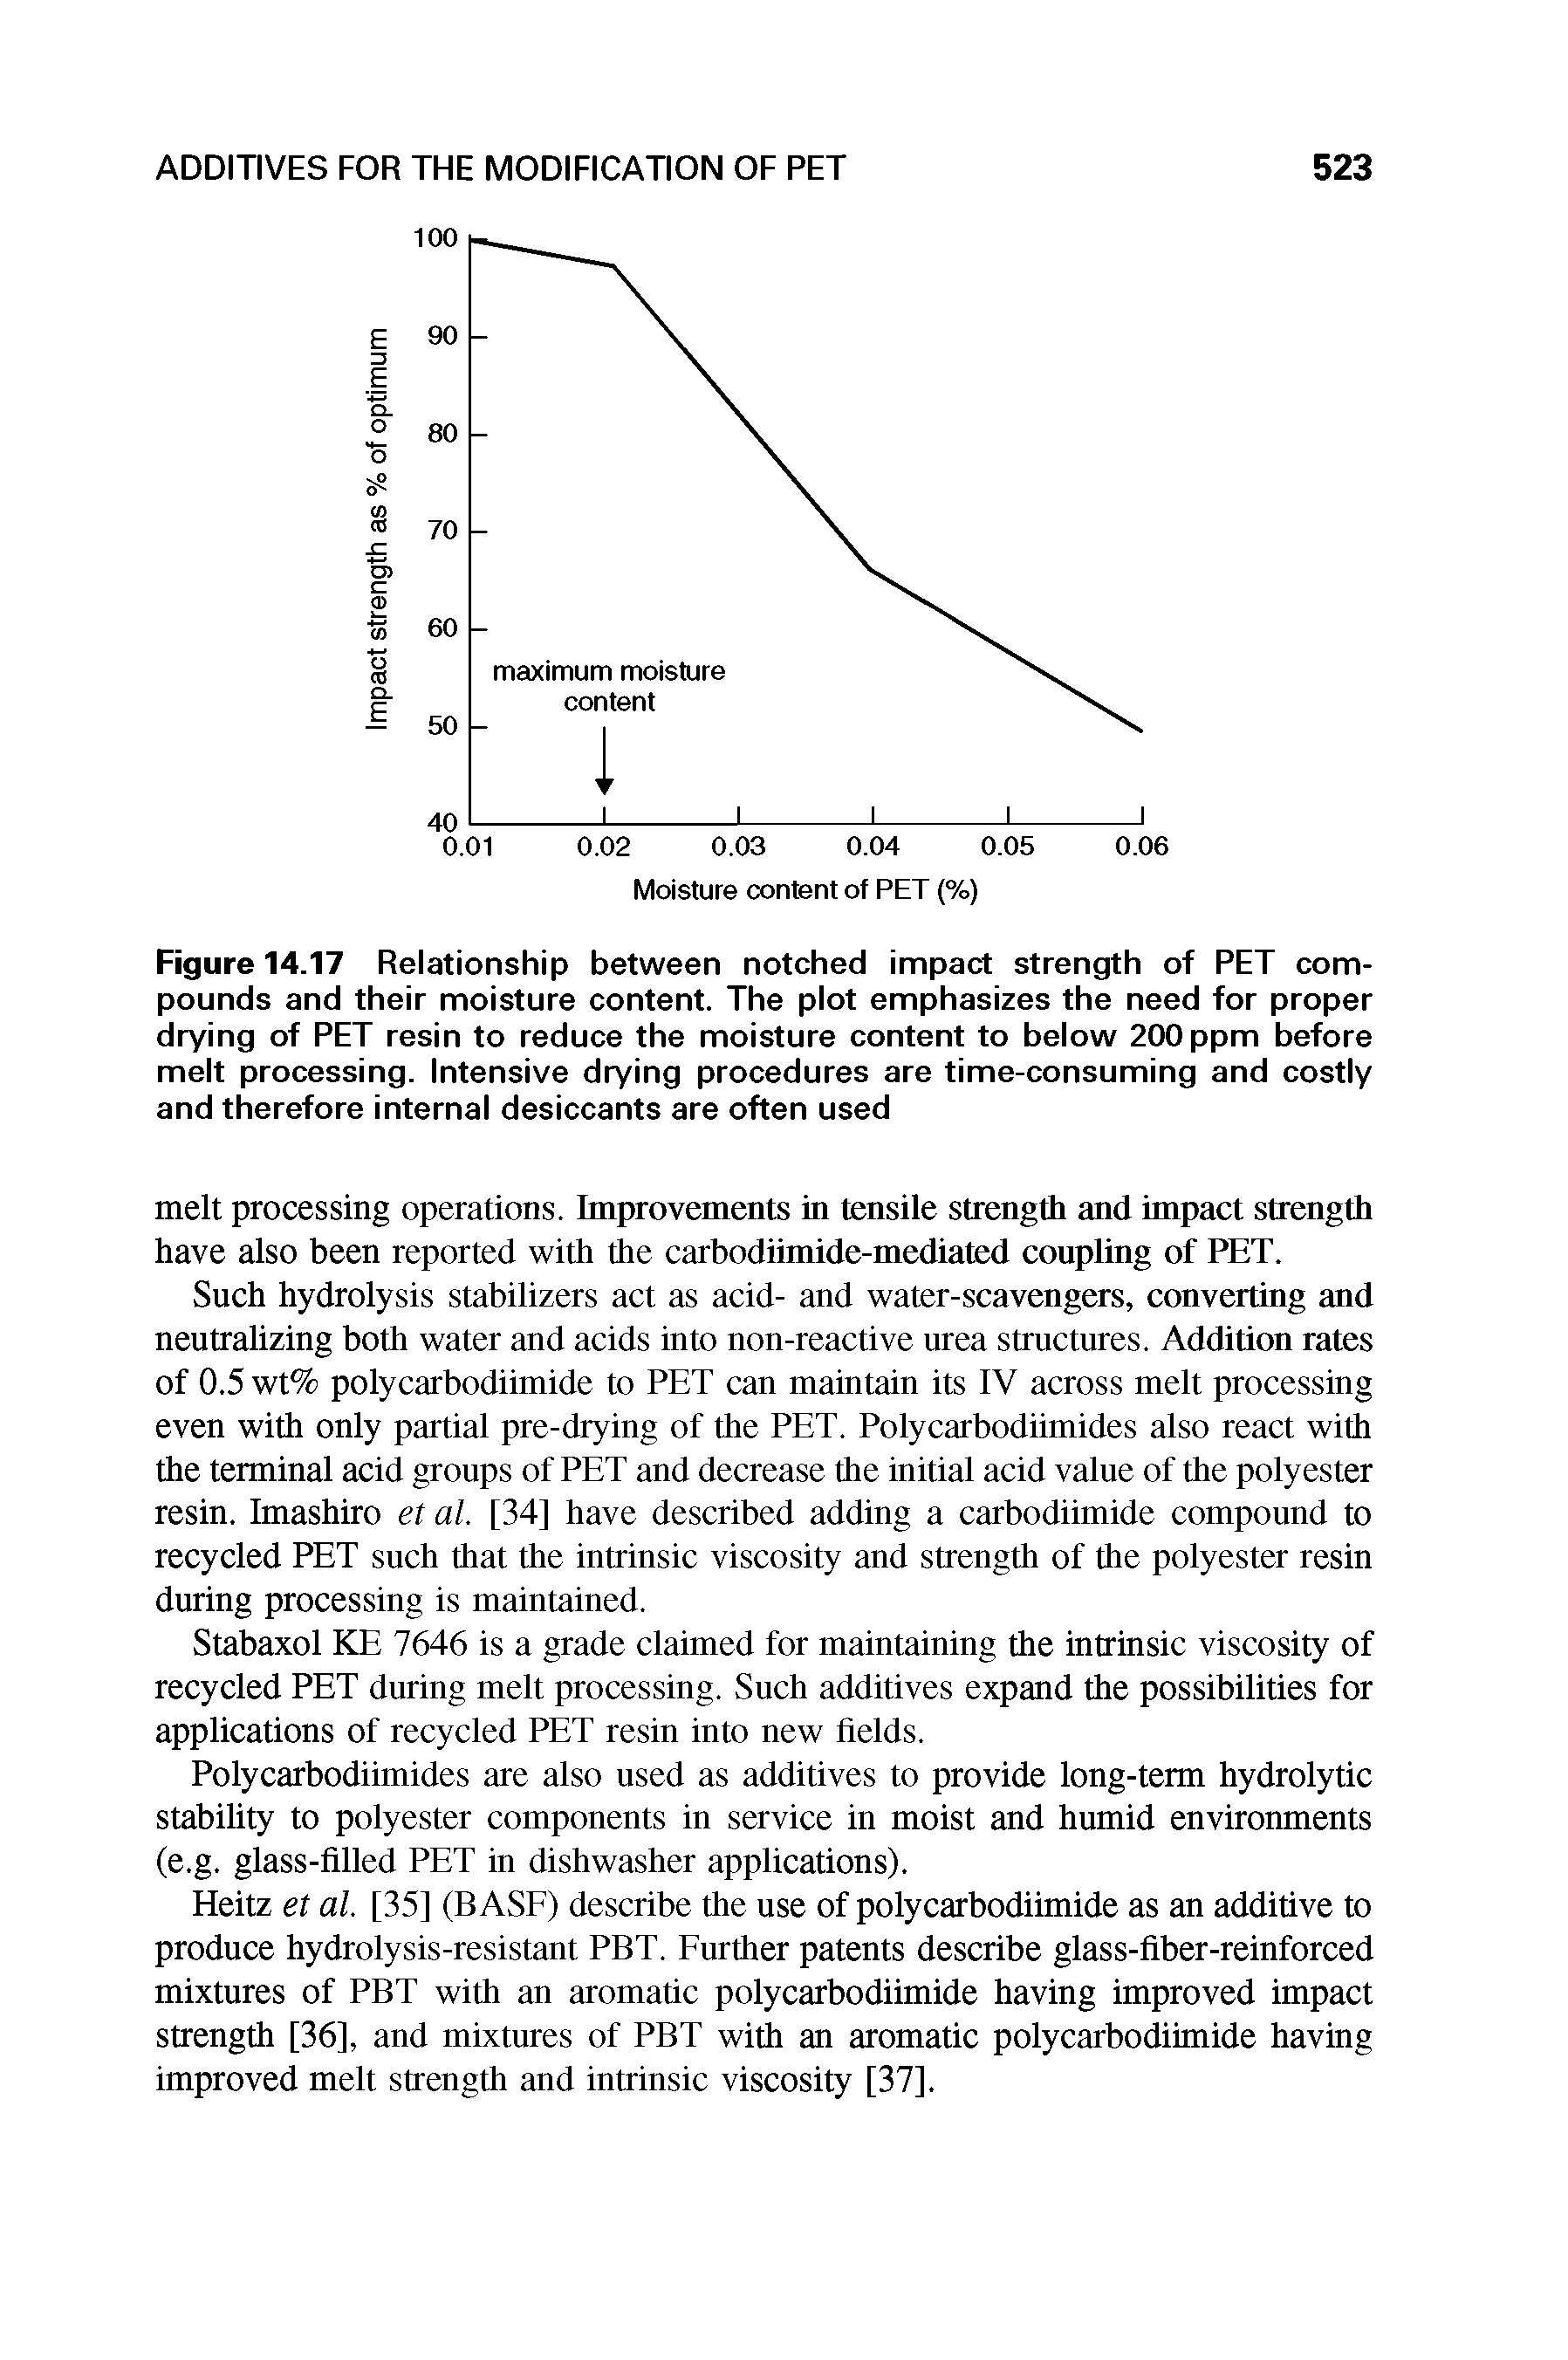 Figure 14.17 Relationship between notched impact strength of PET compounds and their moisture content. The plot emphasizes the need for proper drying of PET resin to reduce the moisture content to below 200 ppm before melt processing. Intensive drying procedures are time-consuming and costly and therefore internal desiccants are often used...